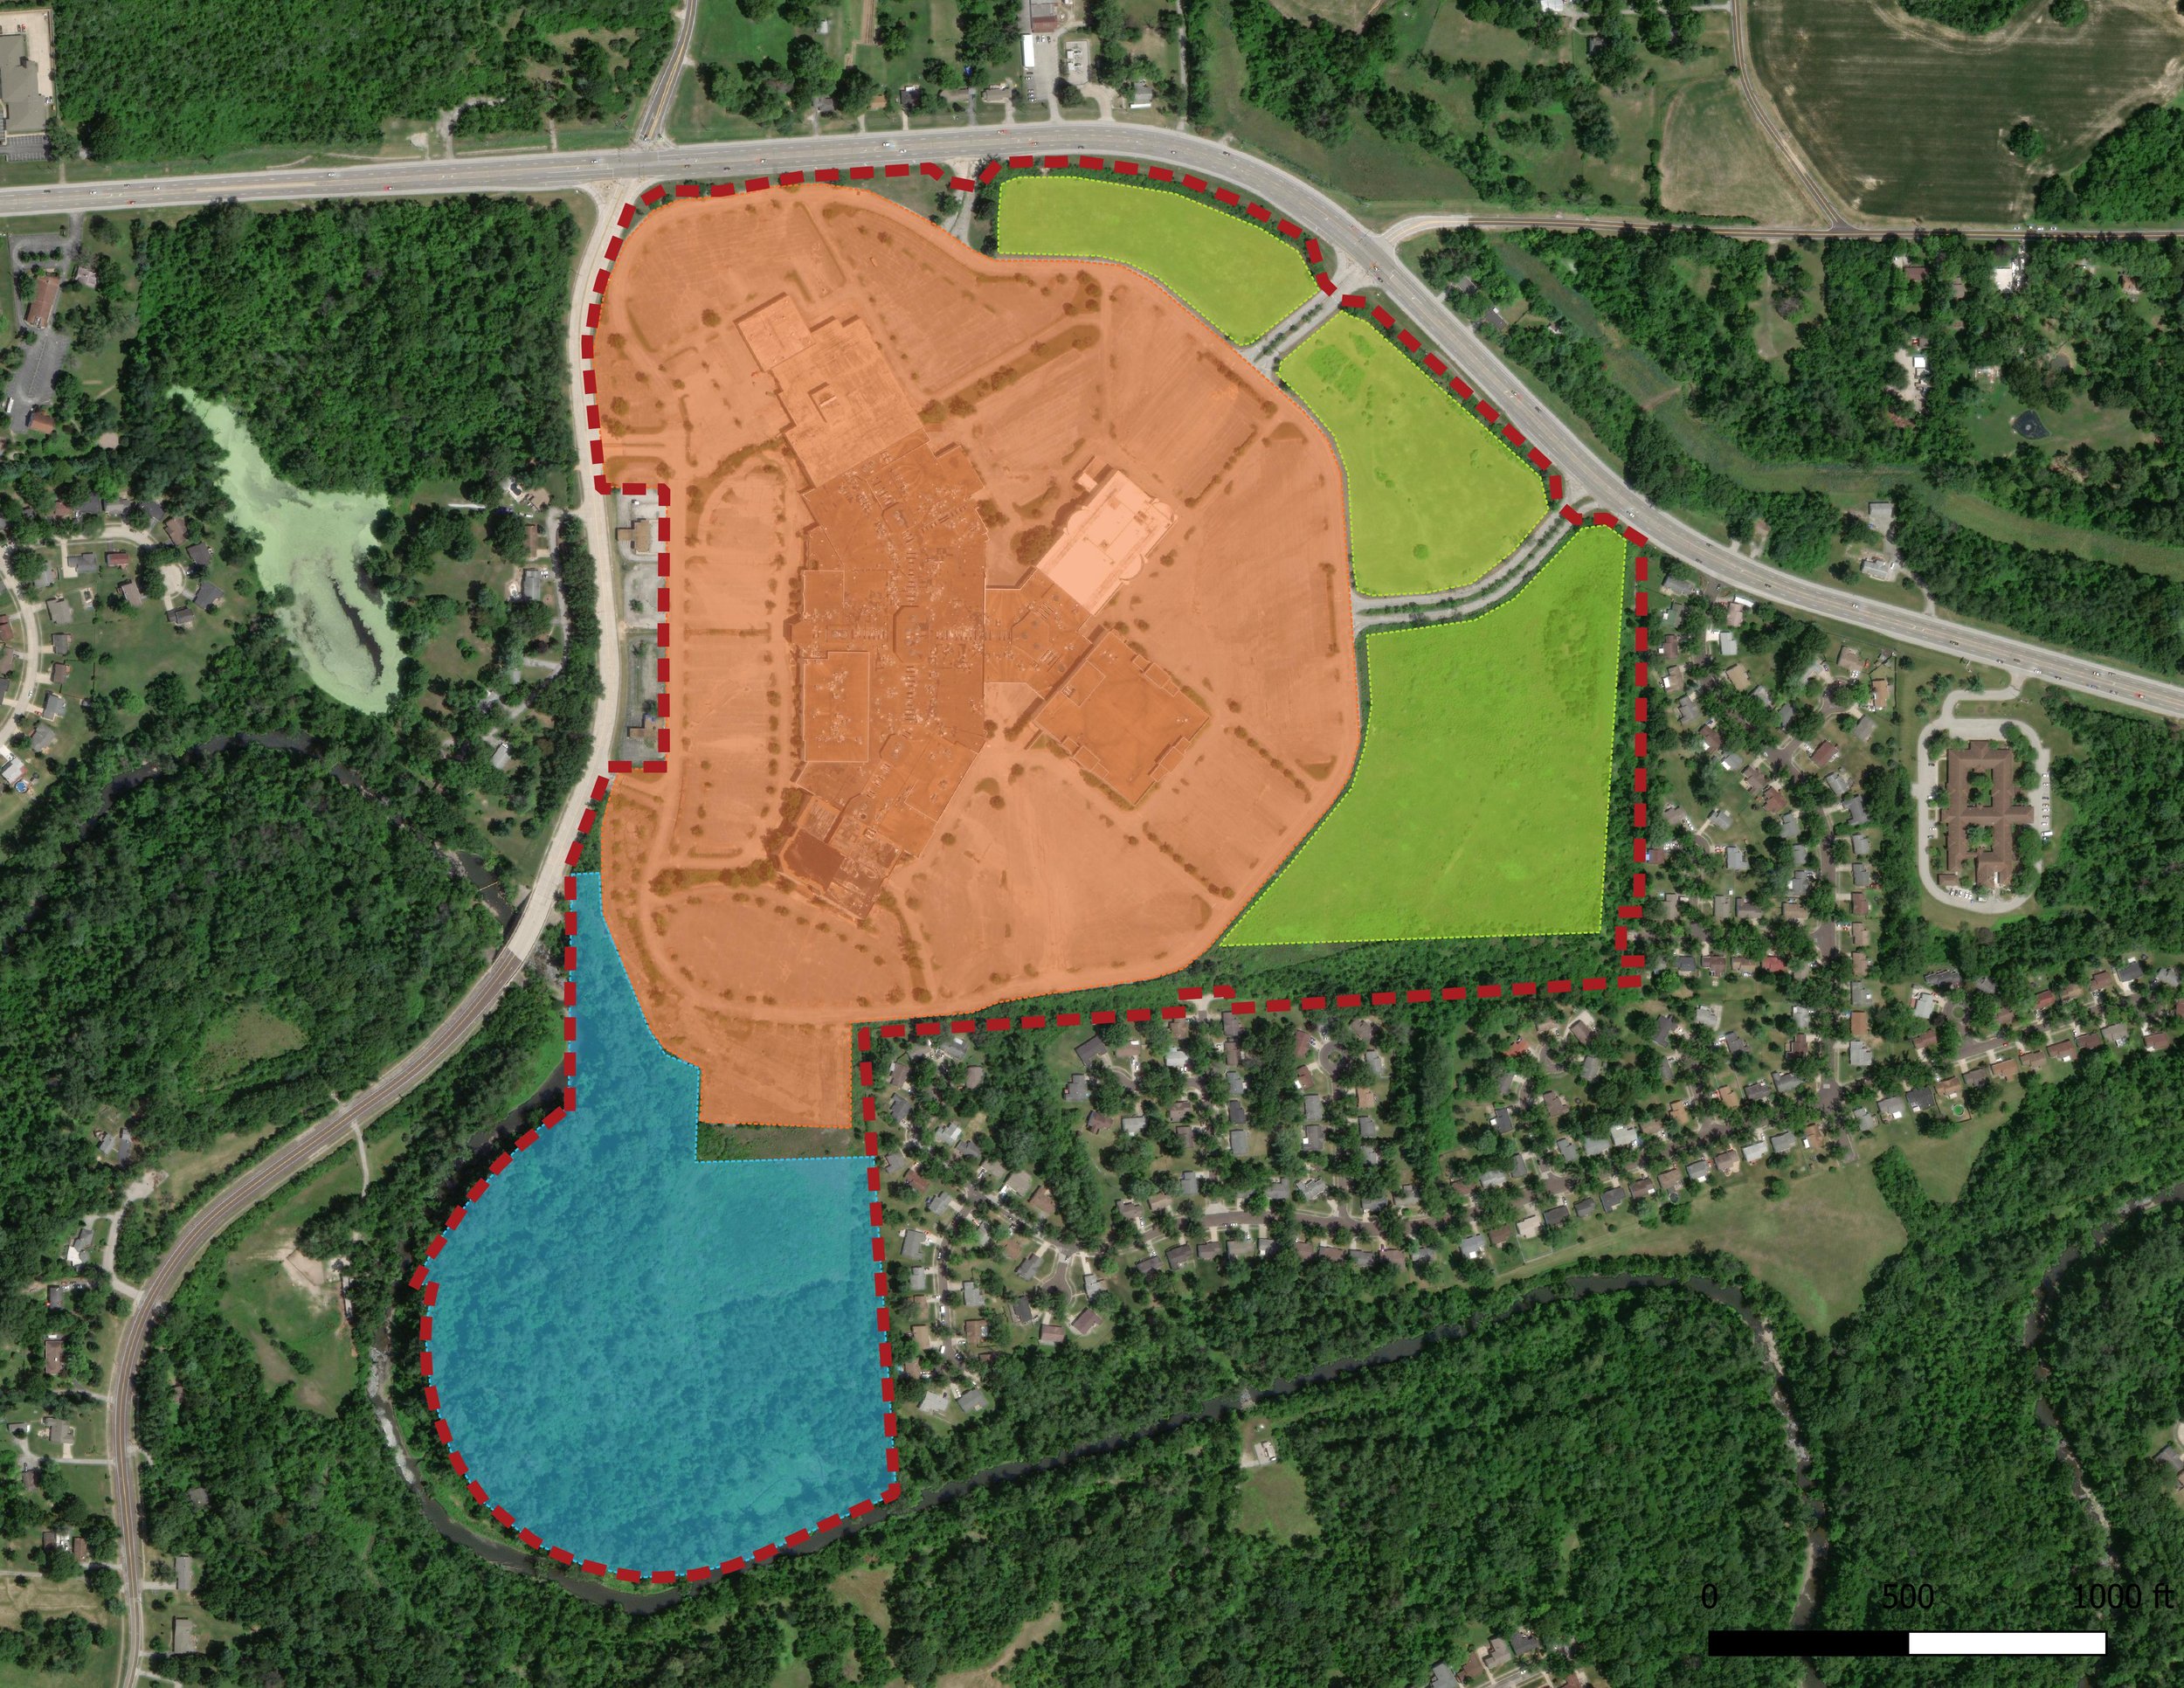  Existing Jamestown Mall Site 